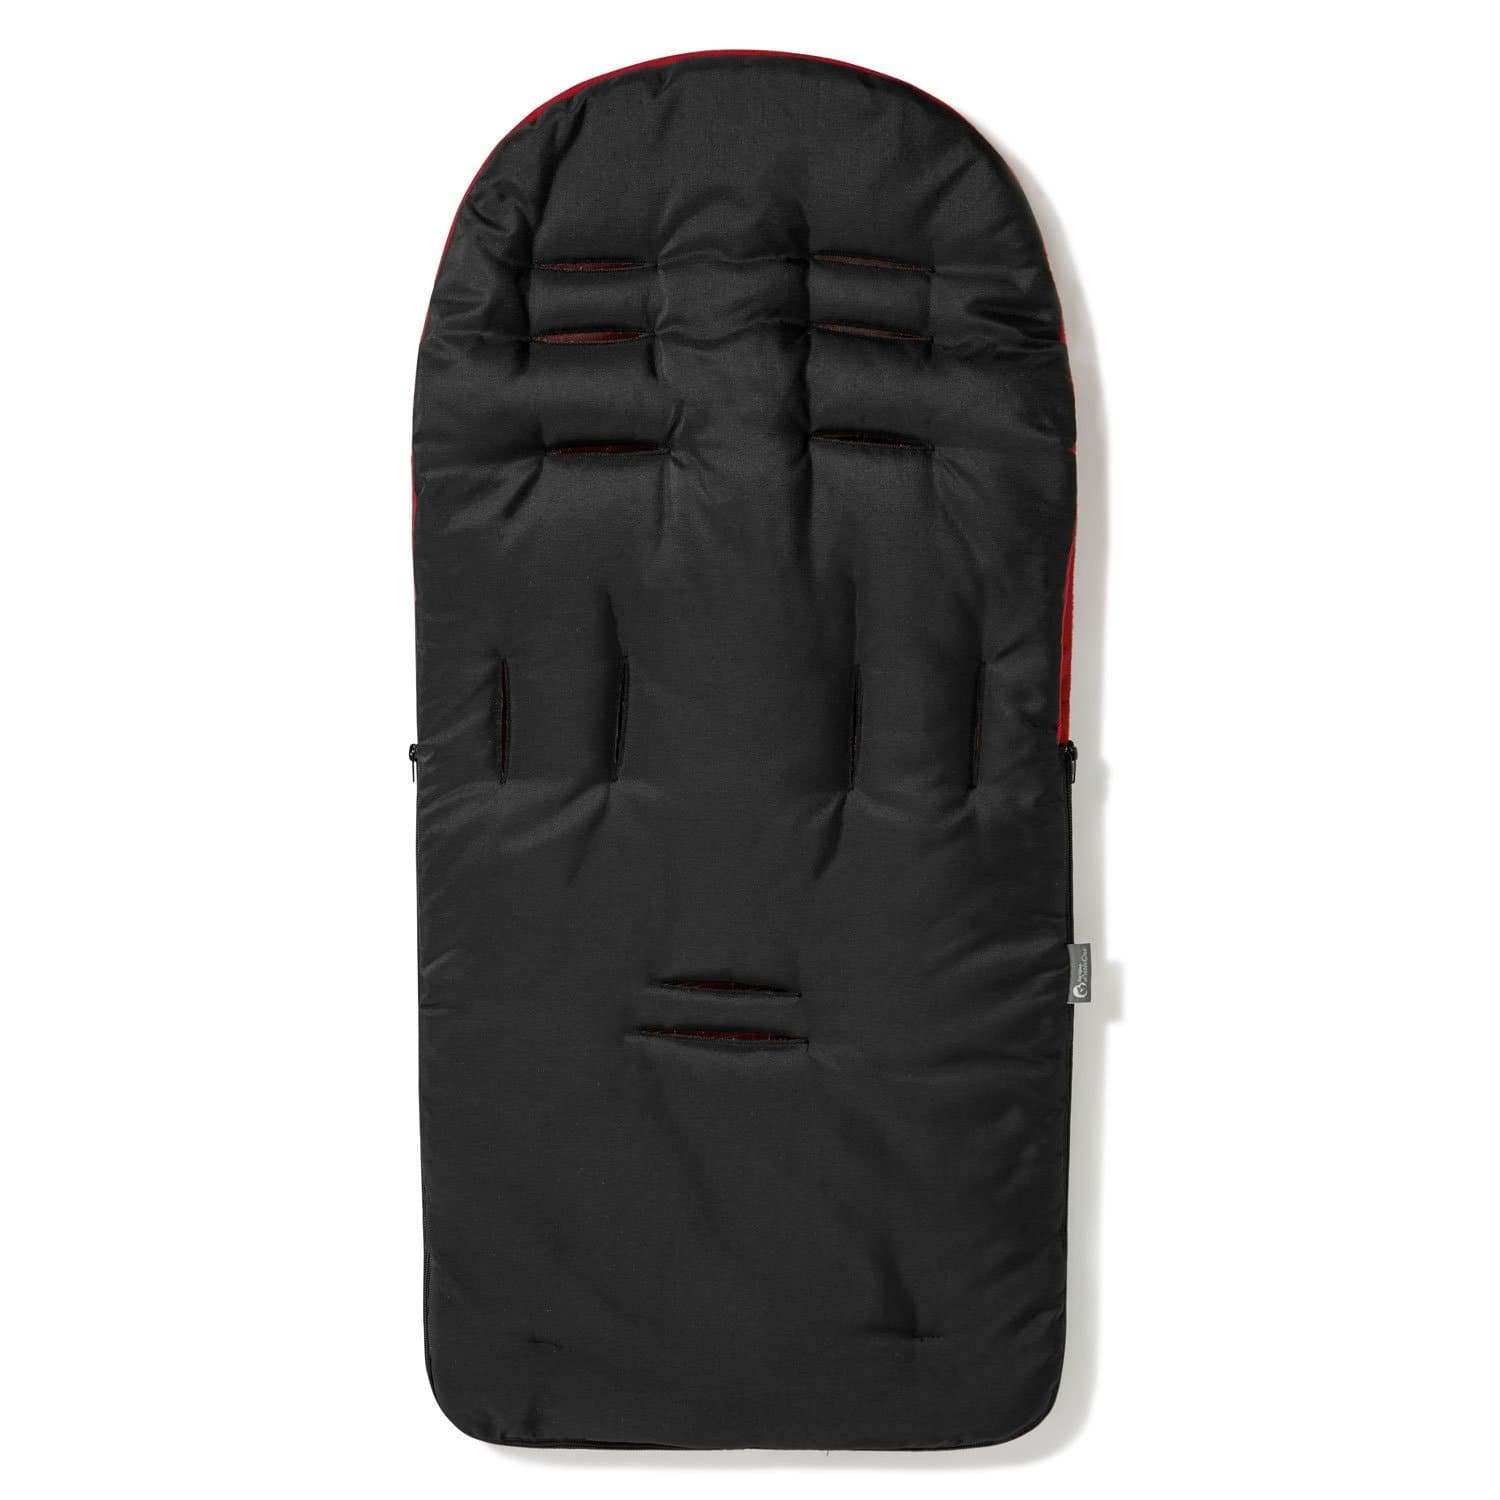 Premium Footmuff / Cosy Toes Compatible with Babybus - For Your Little One